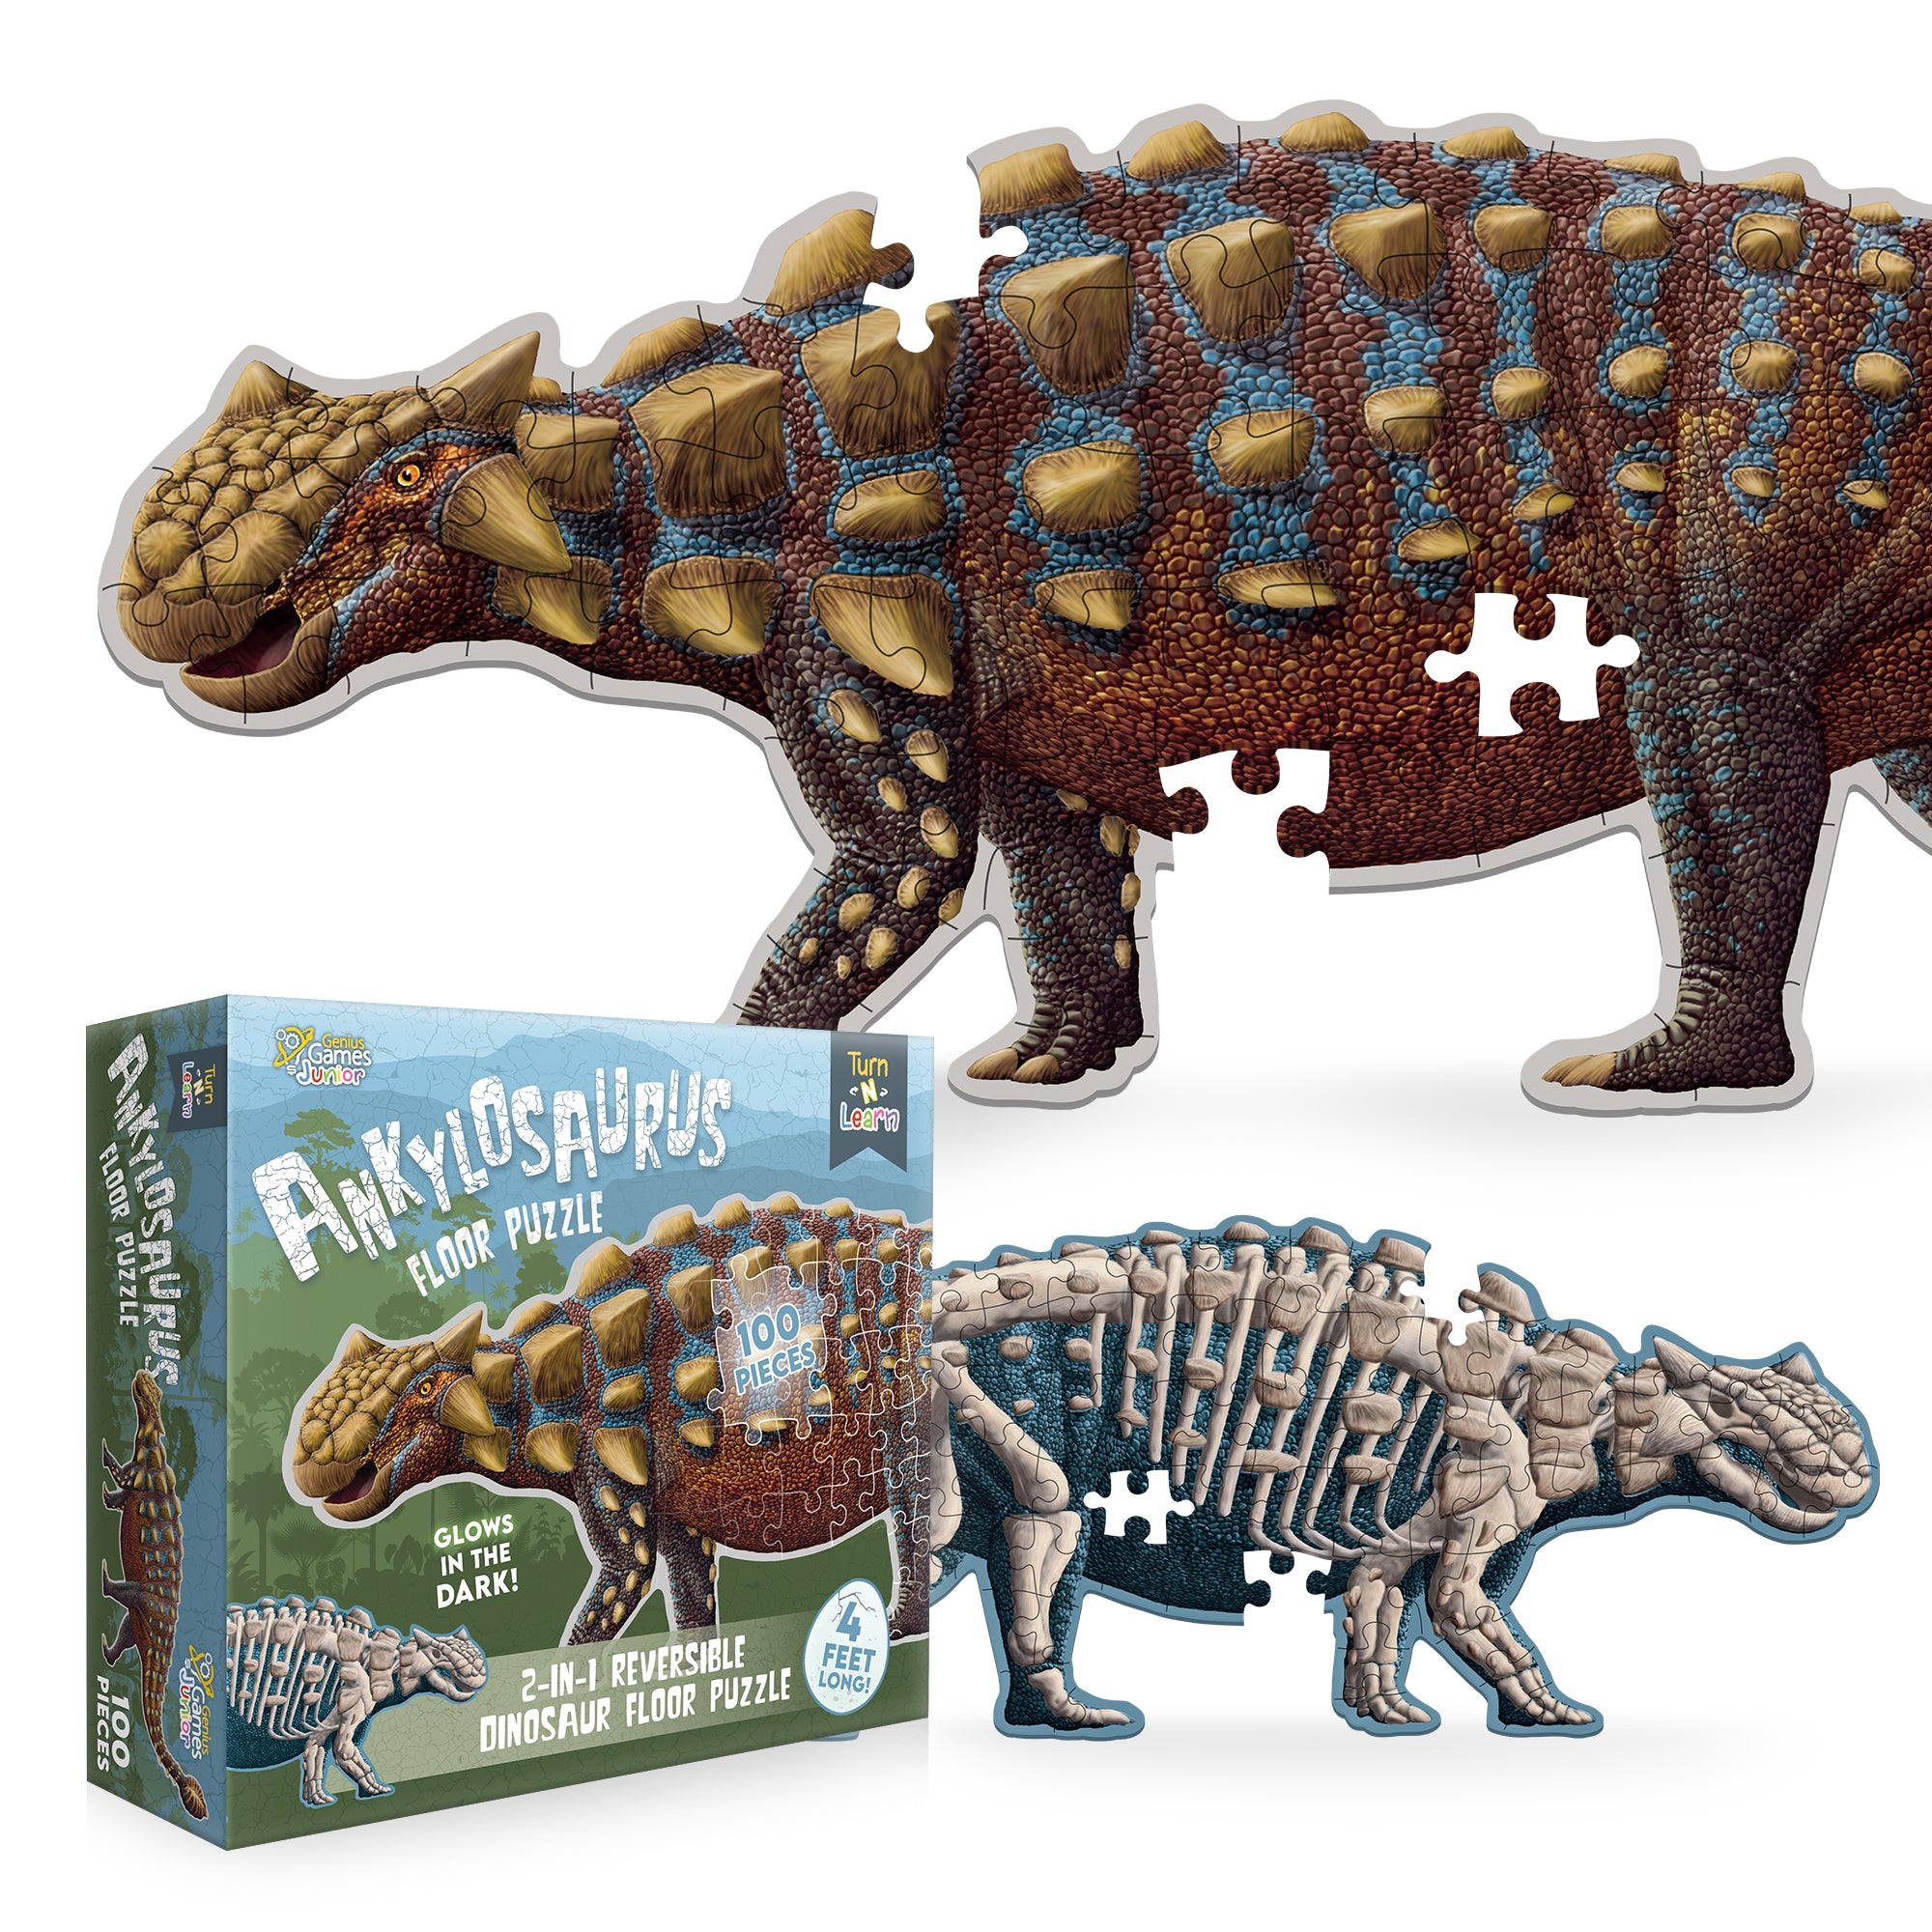 Ankylosaurus Dinosaur Jigsaw Puzzle - 4FT Double Sided Floor Puzzle - 100-Piece Glow in the Dark & Scientifically Accurate Educational Puzzles for Kids